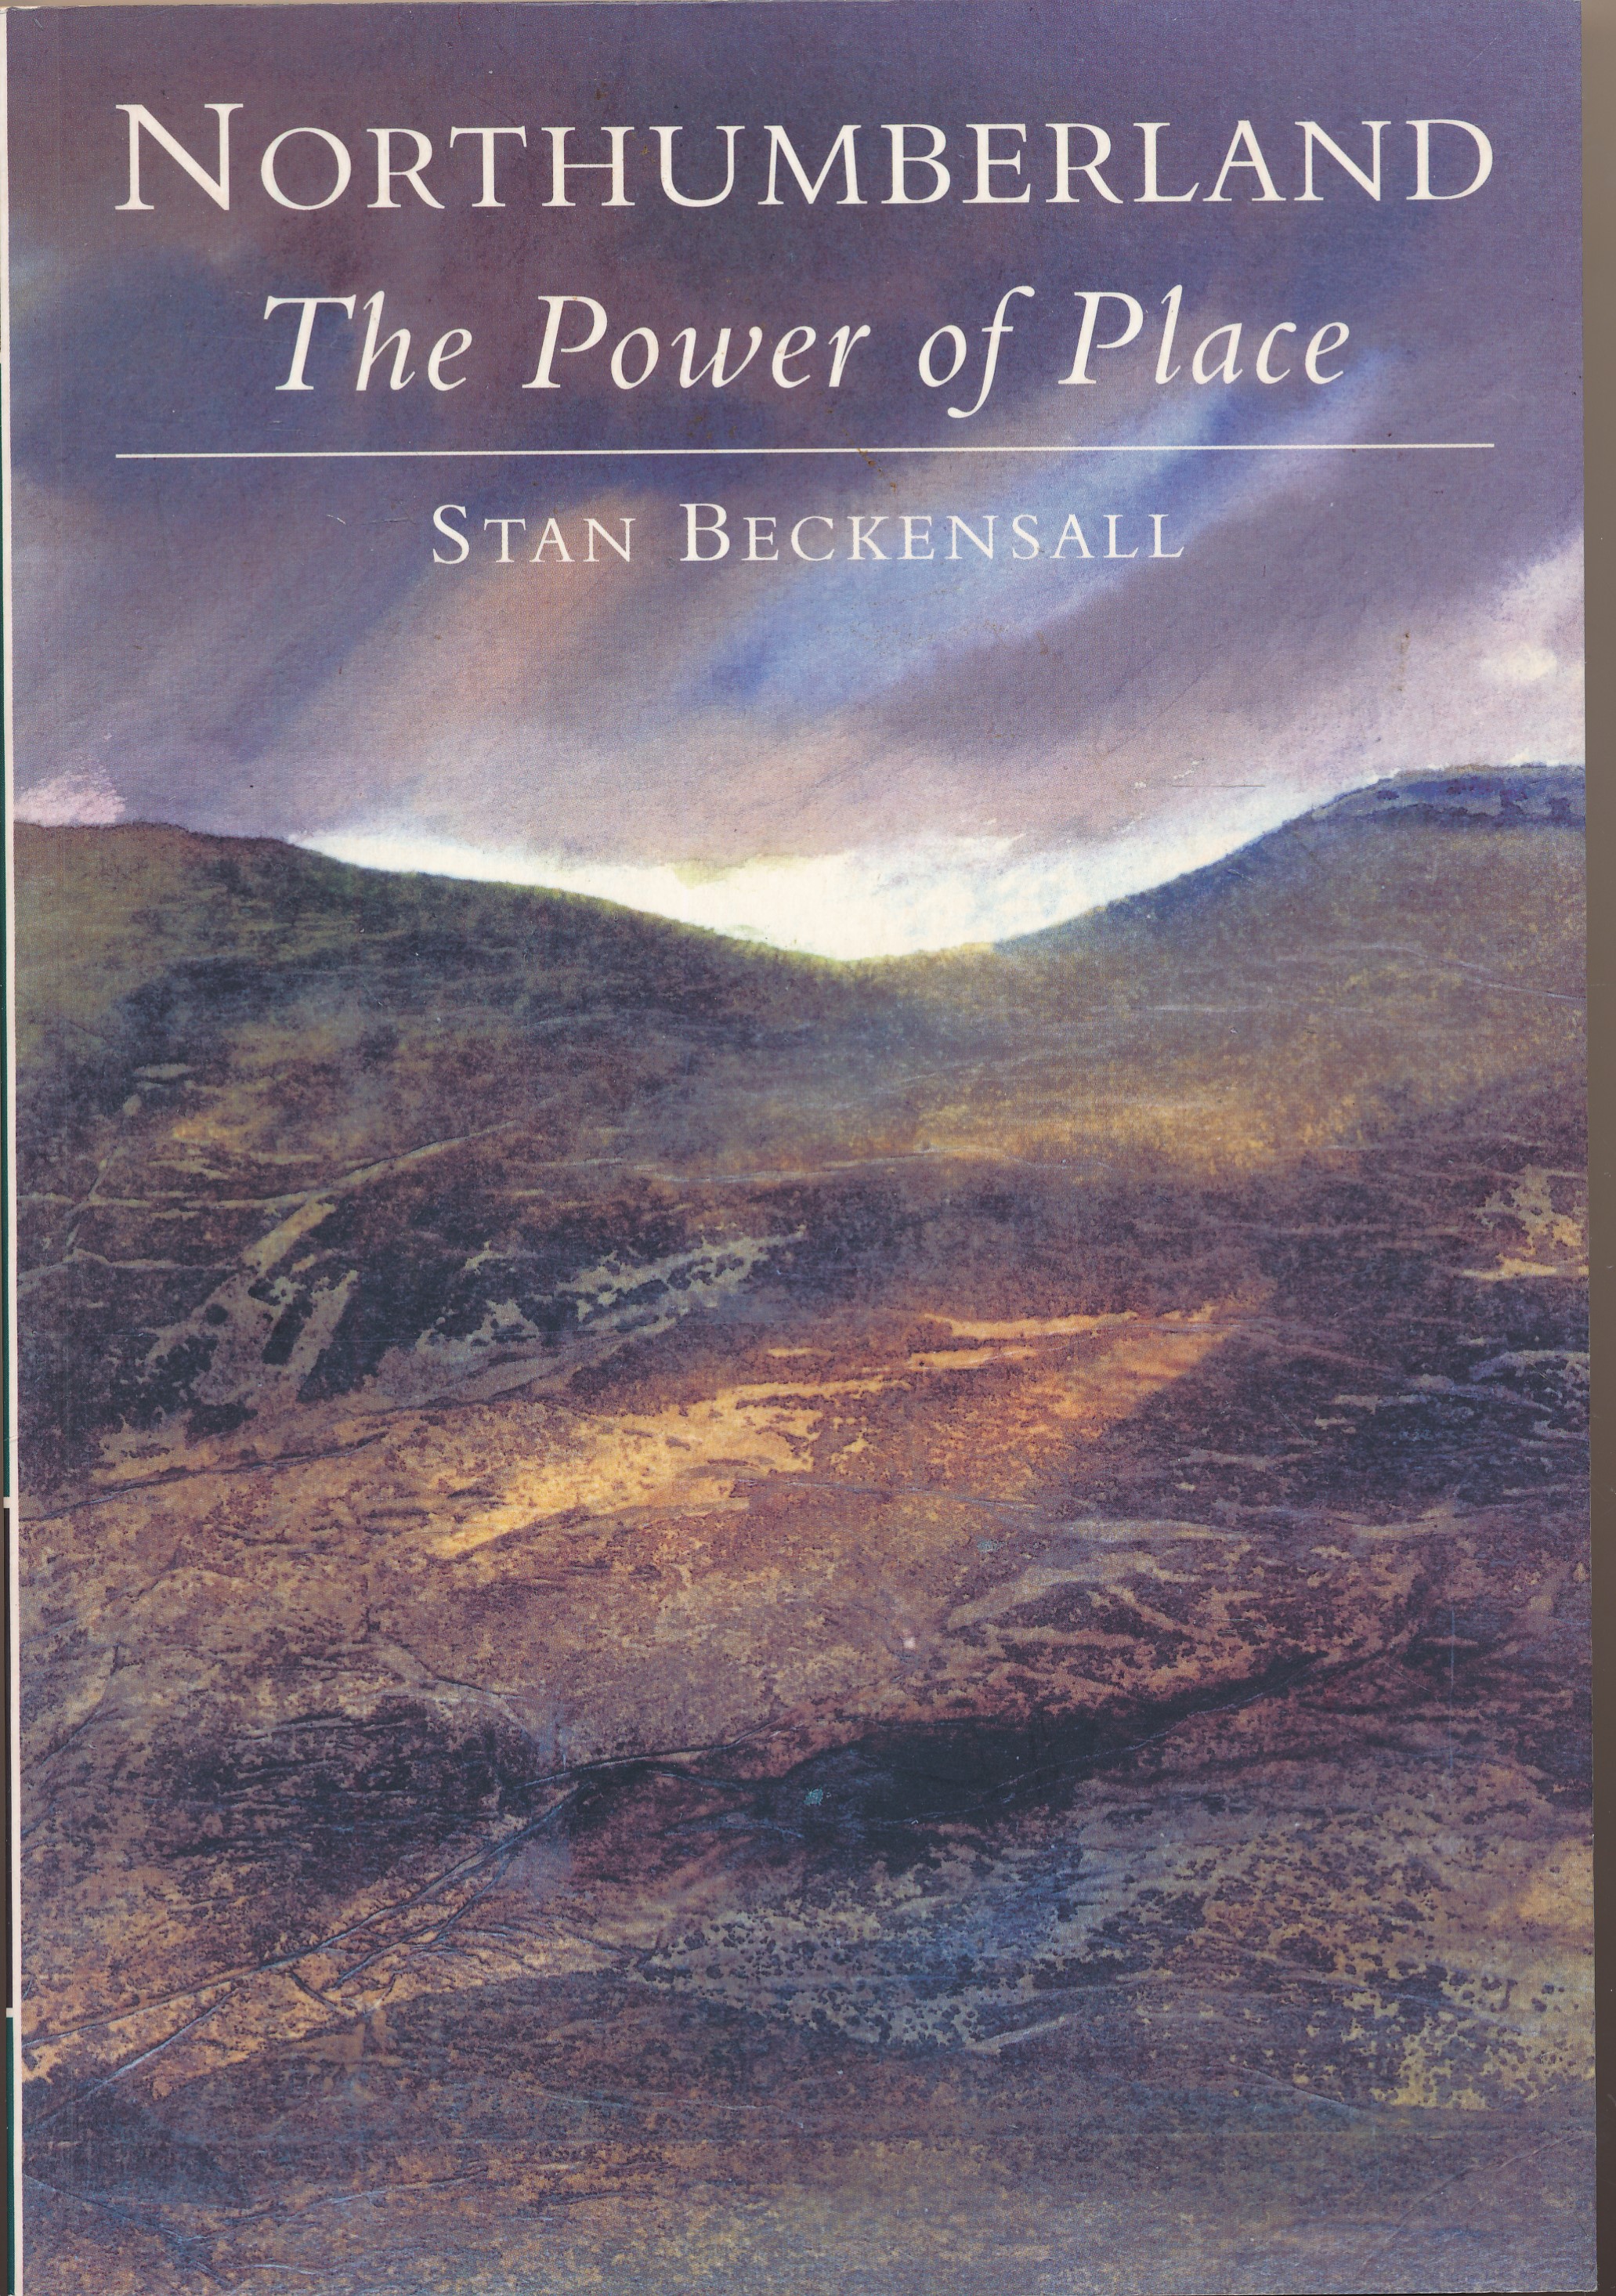 Northumberland: The Power of Place. Signed copy.